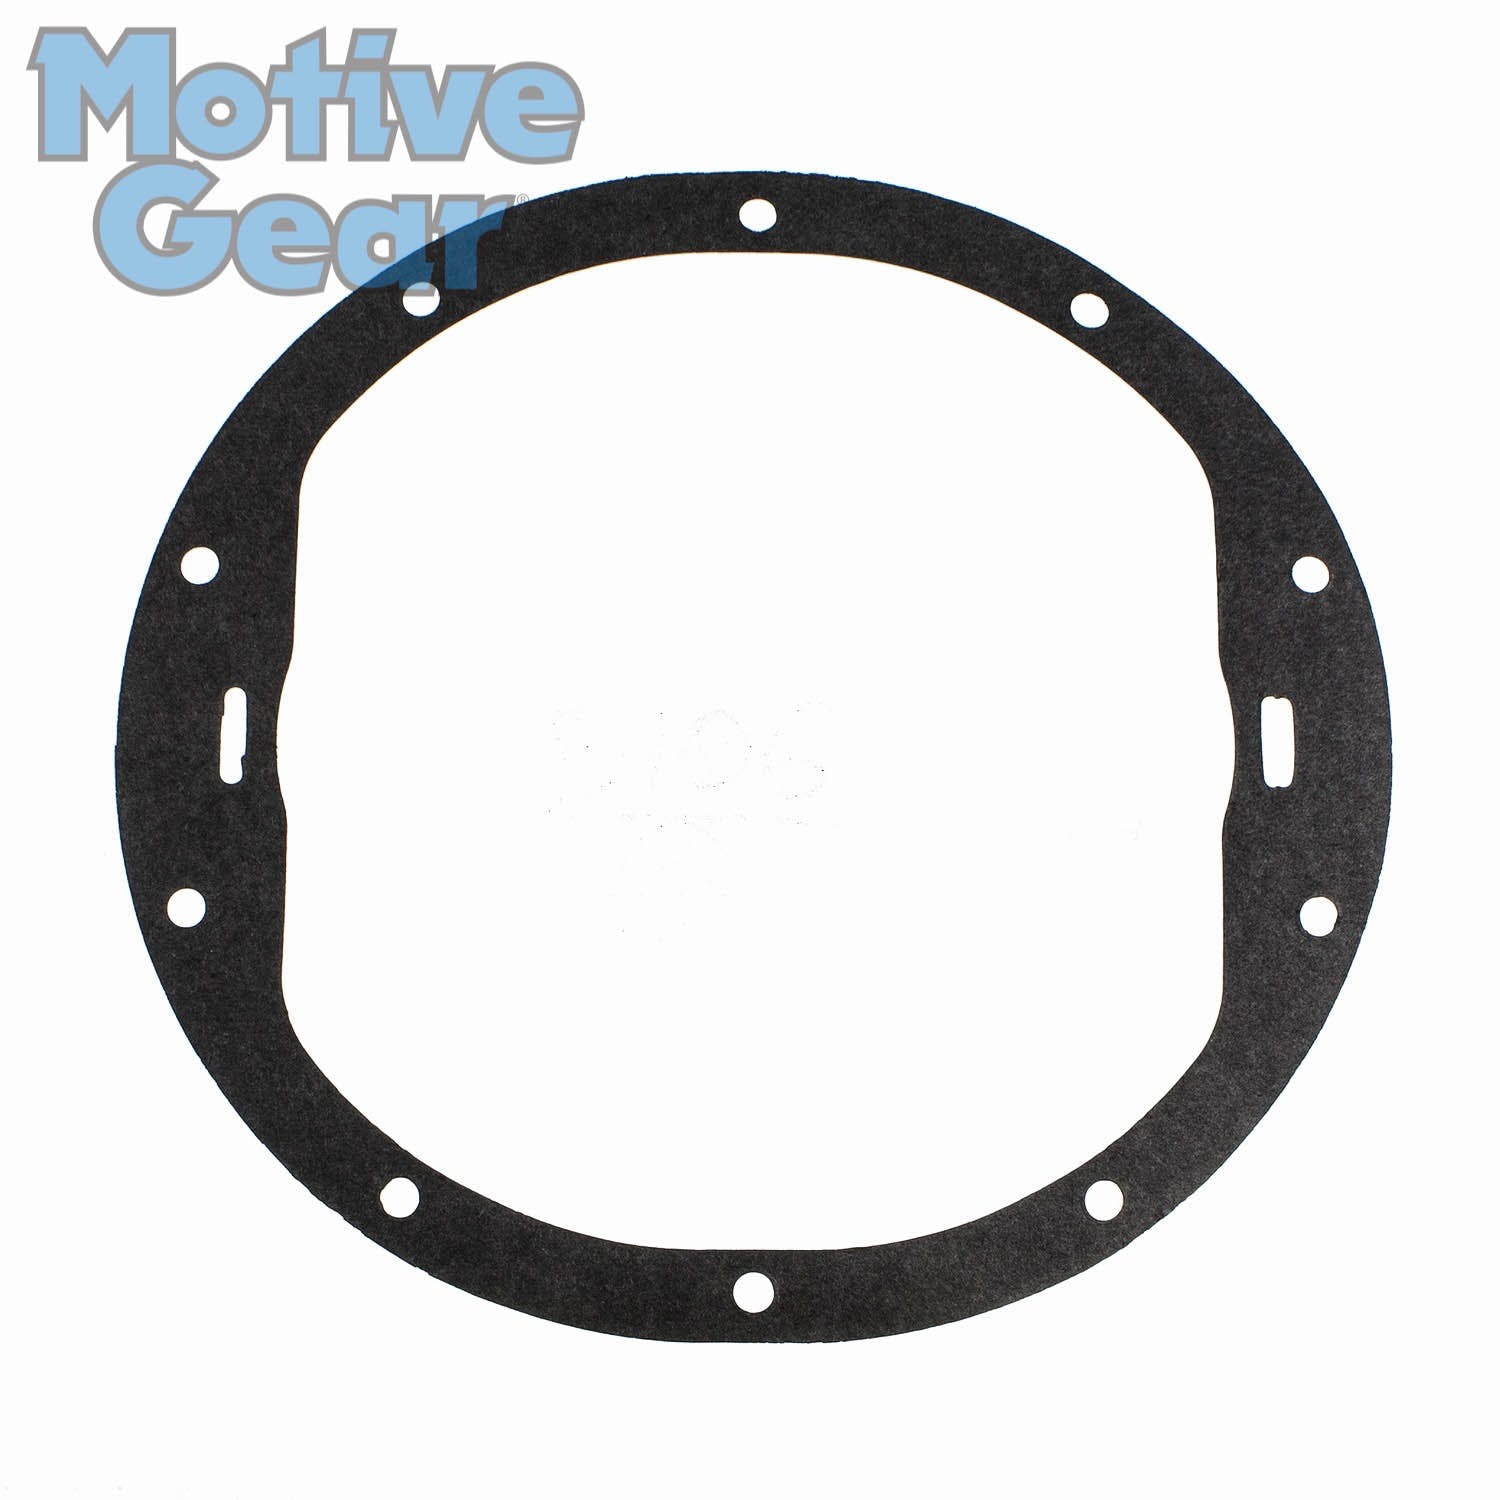 Motive Gear 5106 Differential Cover Gasket